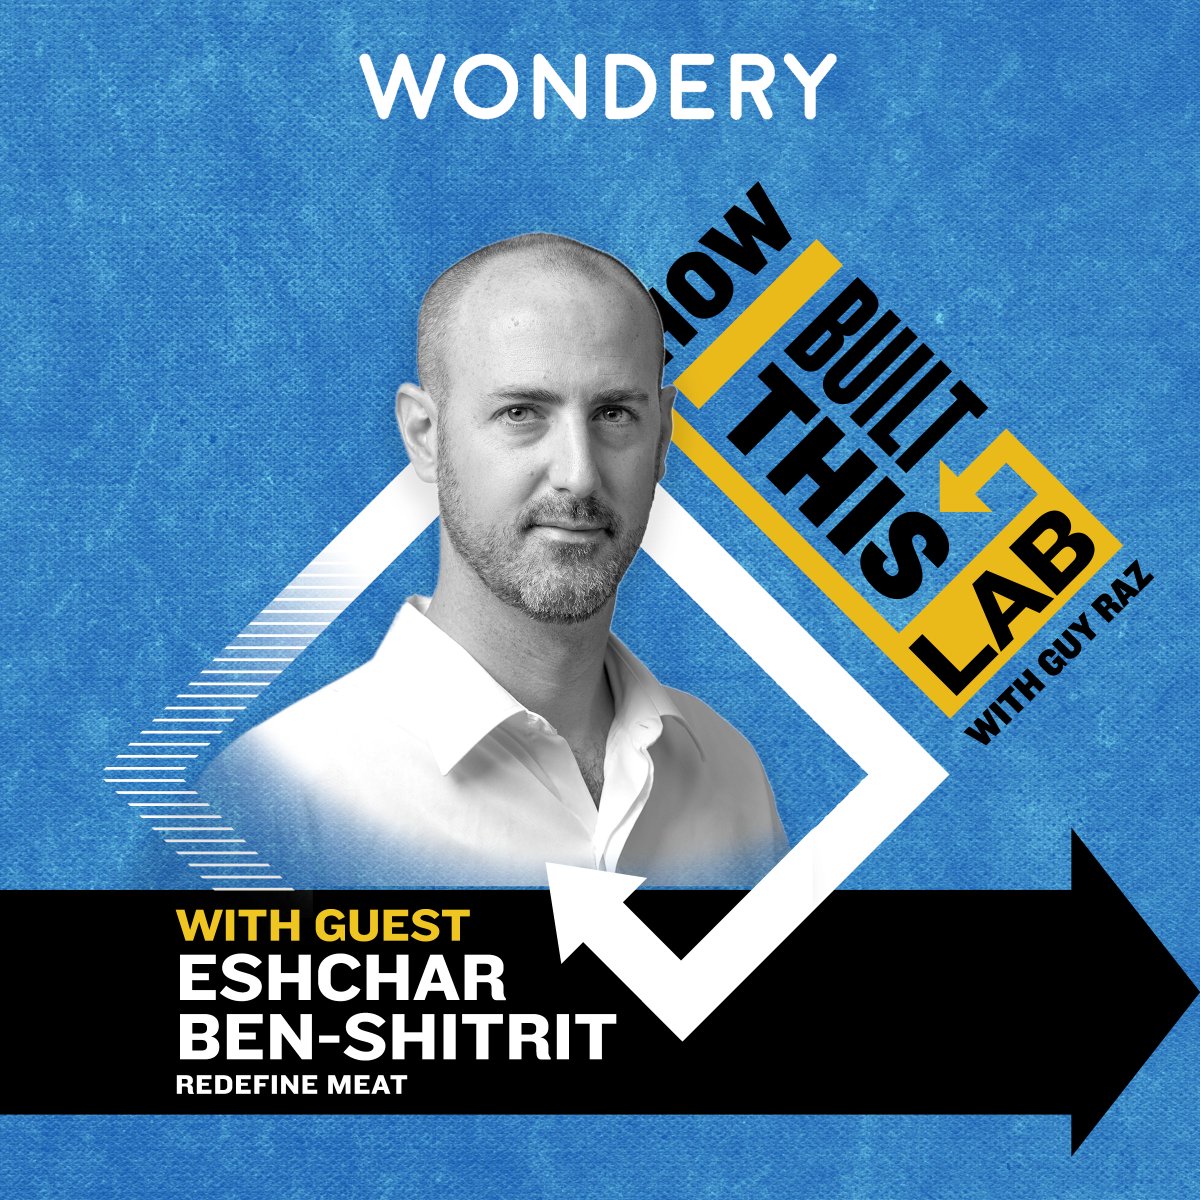 This week on #HowIBuiltThis Lab, Eshchar Ben-Shitrit recounts his path from product manager to marketing executive to @RedefineMeat — the company he launched in 2018 to commercialize 3D-printed, plant-based steaks. Listen here: podcasts.apple.com/us/podcast/whe…